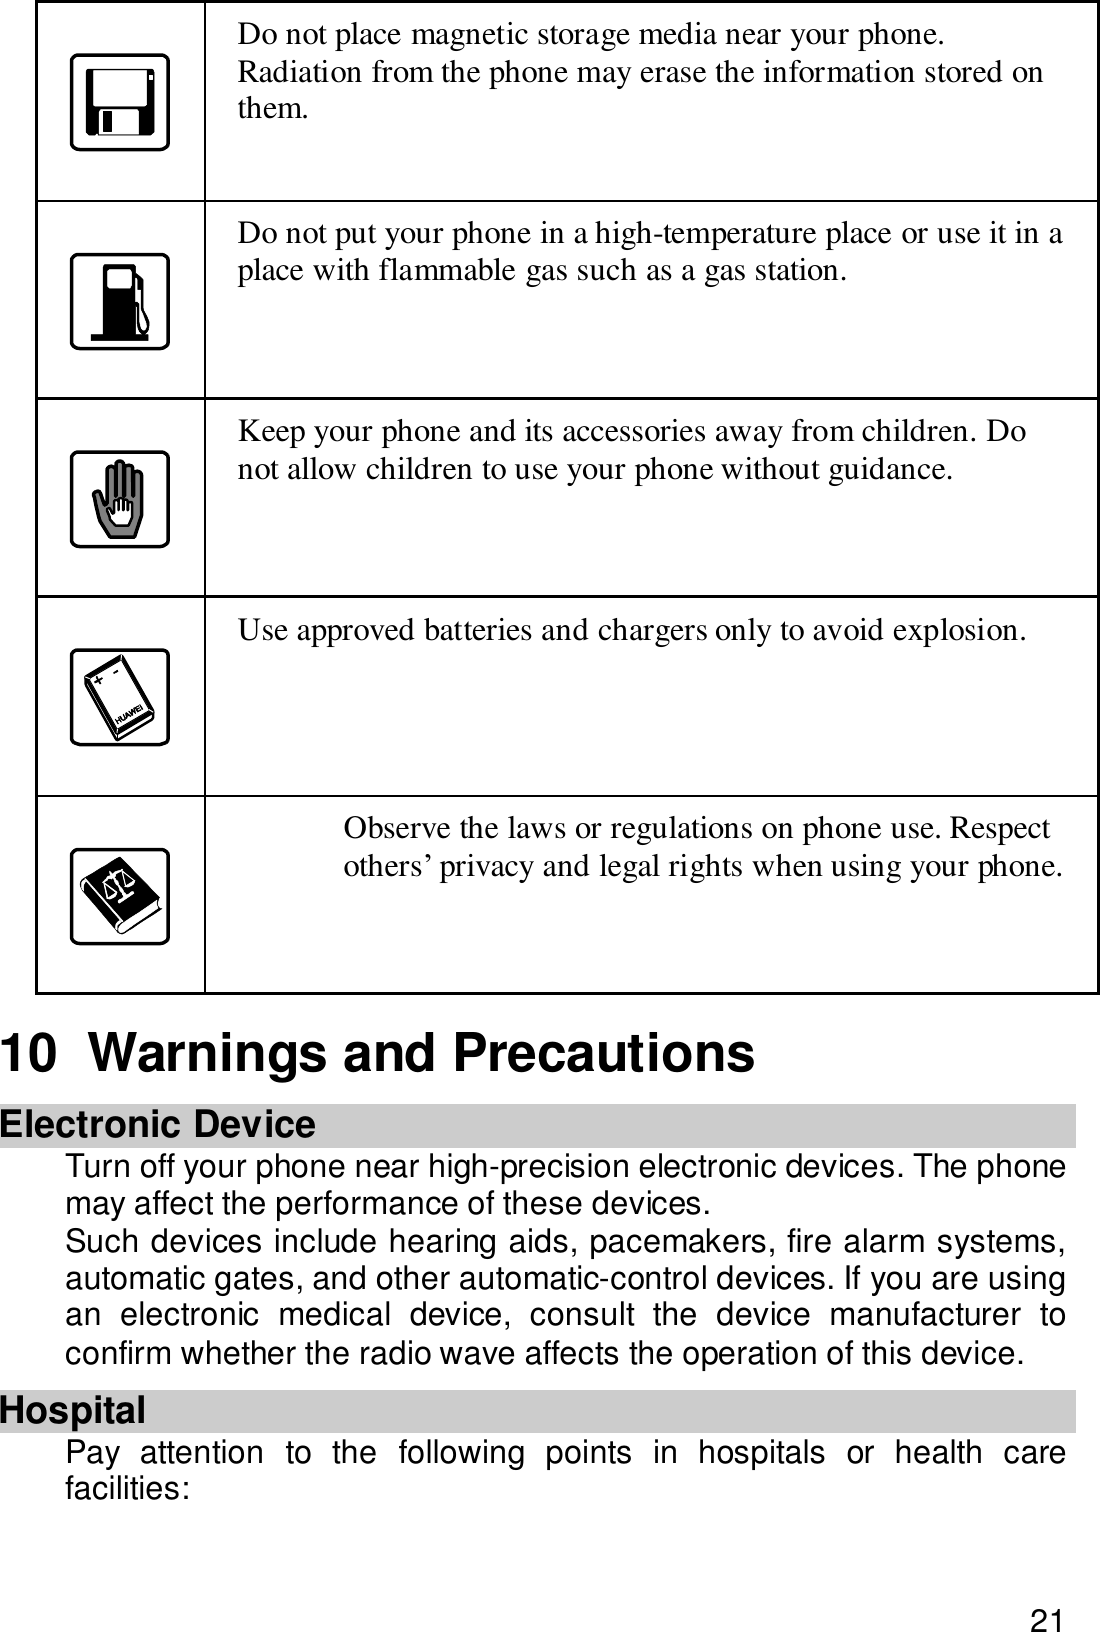  21  Do not place magnetic storage media near your phone. Radiation from the phone may erase the information stored on them.  Do not put your phone in a high-temperature place or use it in a place with flammable gas such as a gas station.  Keep your phone and its accessories away from children. Do not allow children to use your phone without guidance.  Use approved batteries and chargers only to avoid explosion.  Observe the laws or regulations on phone use. Respect others’ privacy and legal rights when using your phone. 10  Warnings and Precautions Electronic Device Turn off your phone near high-precision electronic devices. The phone may affect the performance of these devices. Such devices include hearing aids, pacemakers, fire alarm systems, automatic gates, and other automatic-control devices. If you are using an electronic medical device, consult the device manufacturer to confirm whether the radio wave affects the operation of this device. Hospital Pay attention to the following points in hospitals or health care facilities: 